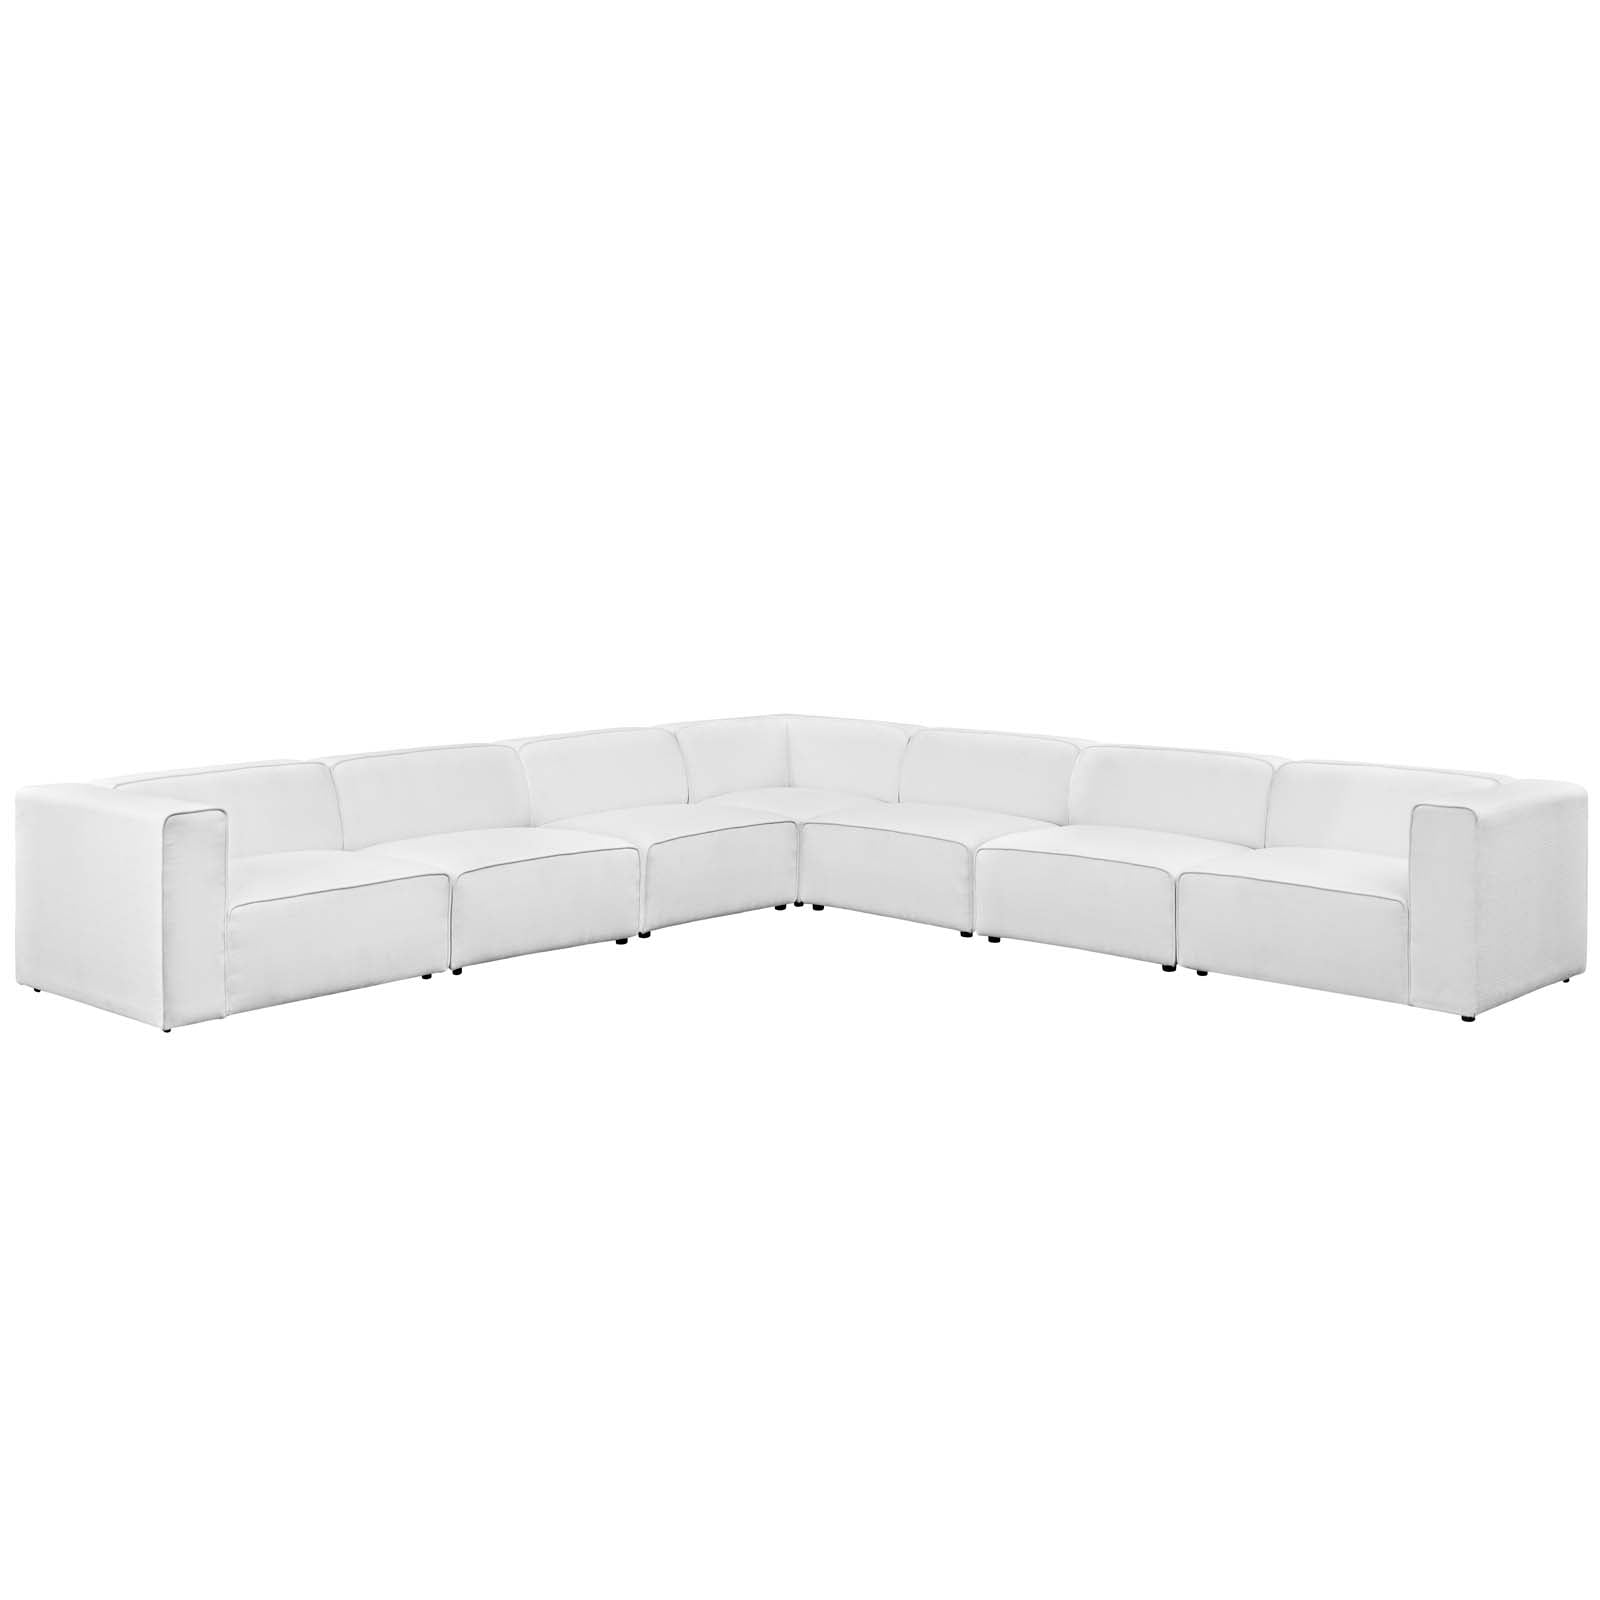 Modway Sectional Sofas - Mingle 7 Piece Upholstered Fabric Sectional Sofa Set White 149"